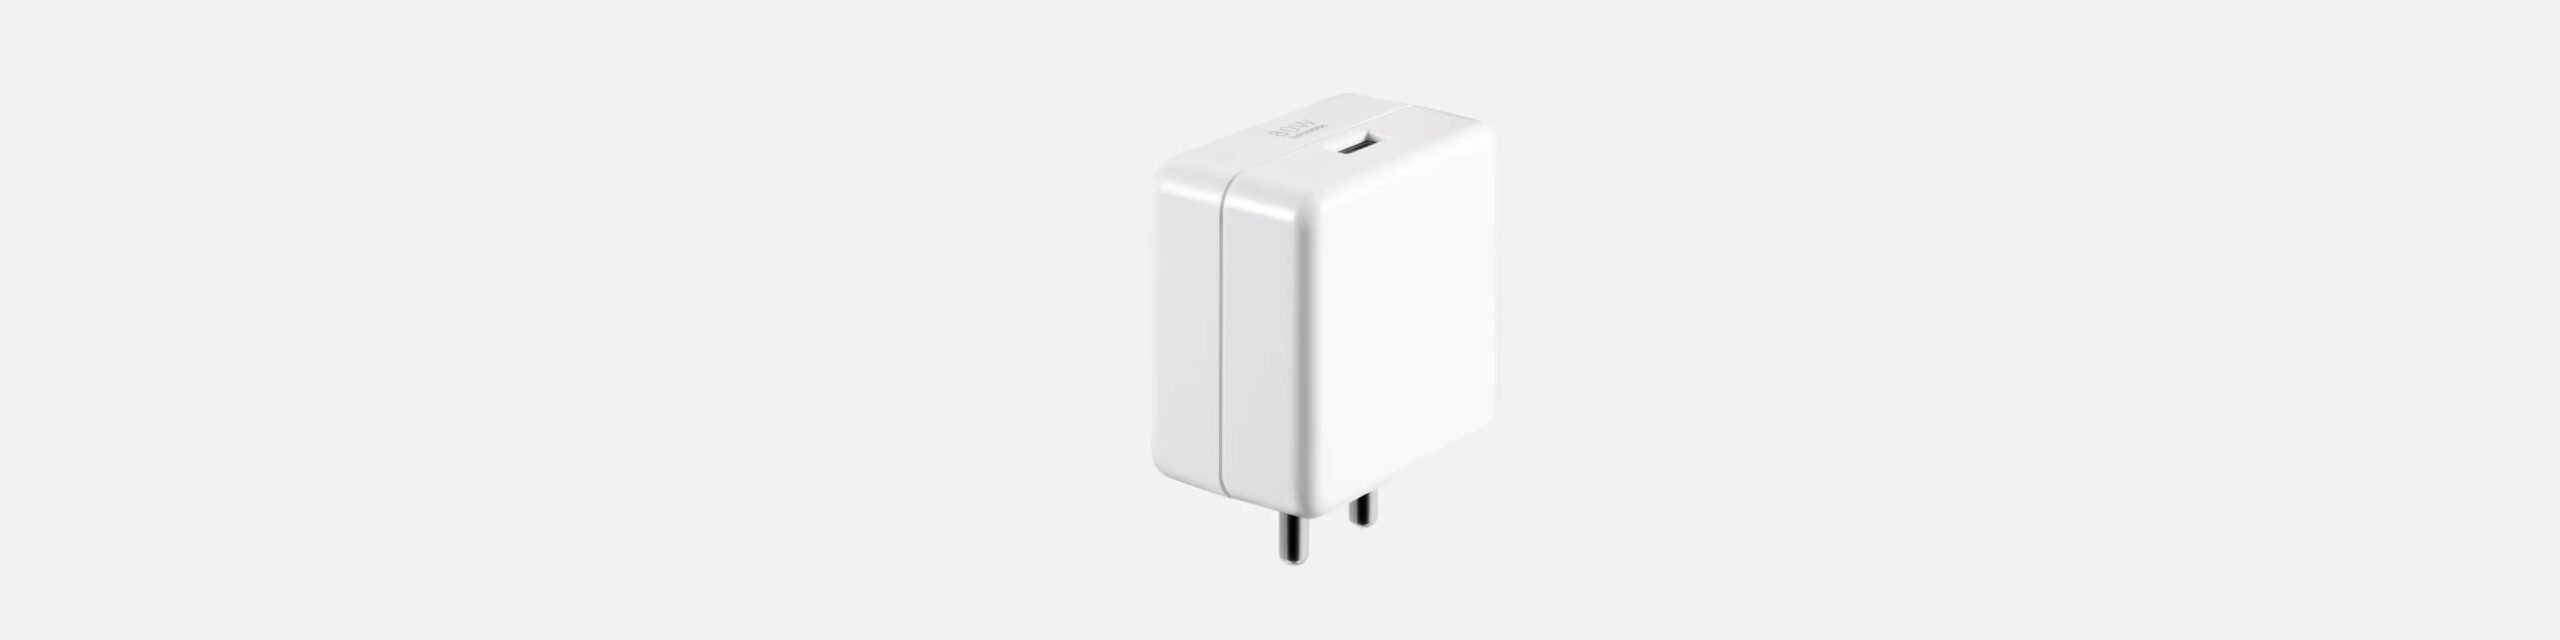 OnePlus SUPERVOOC 80W Power Adapter mATERIAL scaled